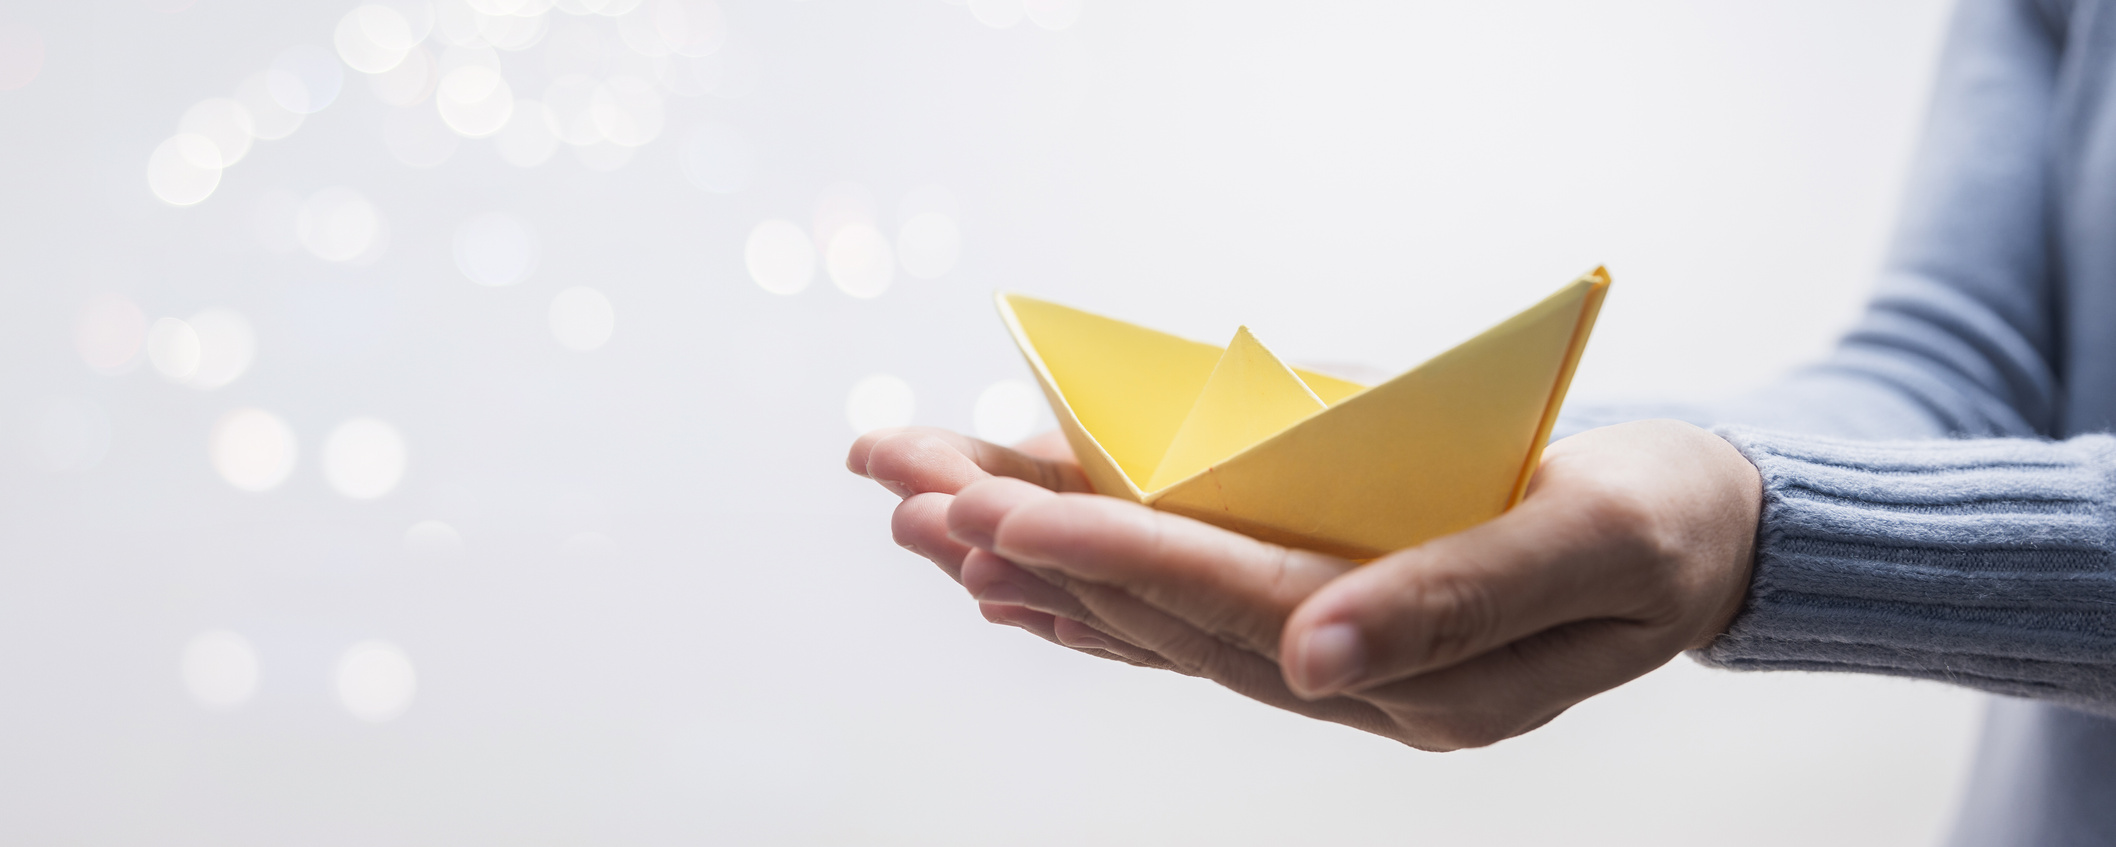 yellow paper boat on hand of woman leader